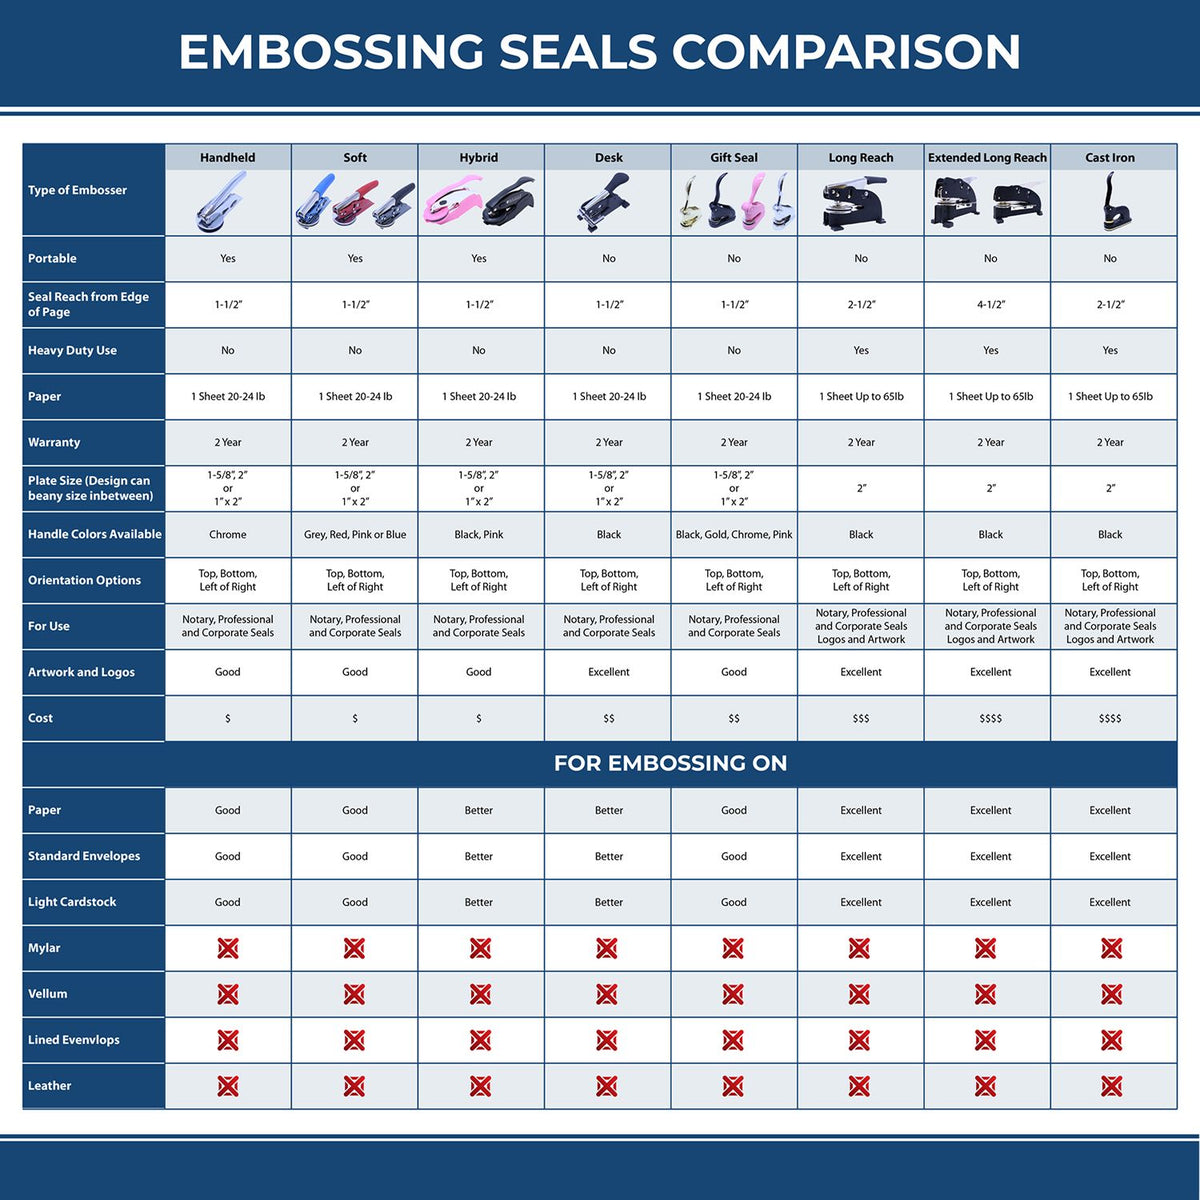 A comparison chart for the different types of mount models available for the Connecticut Engineer Desk Seal.